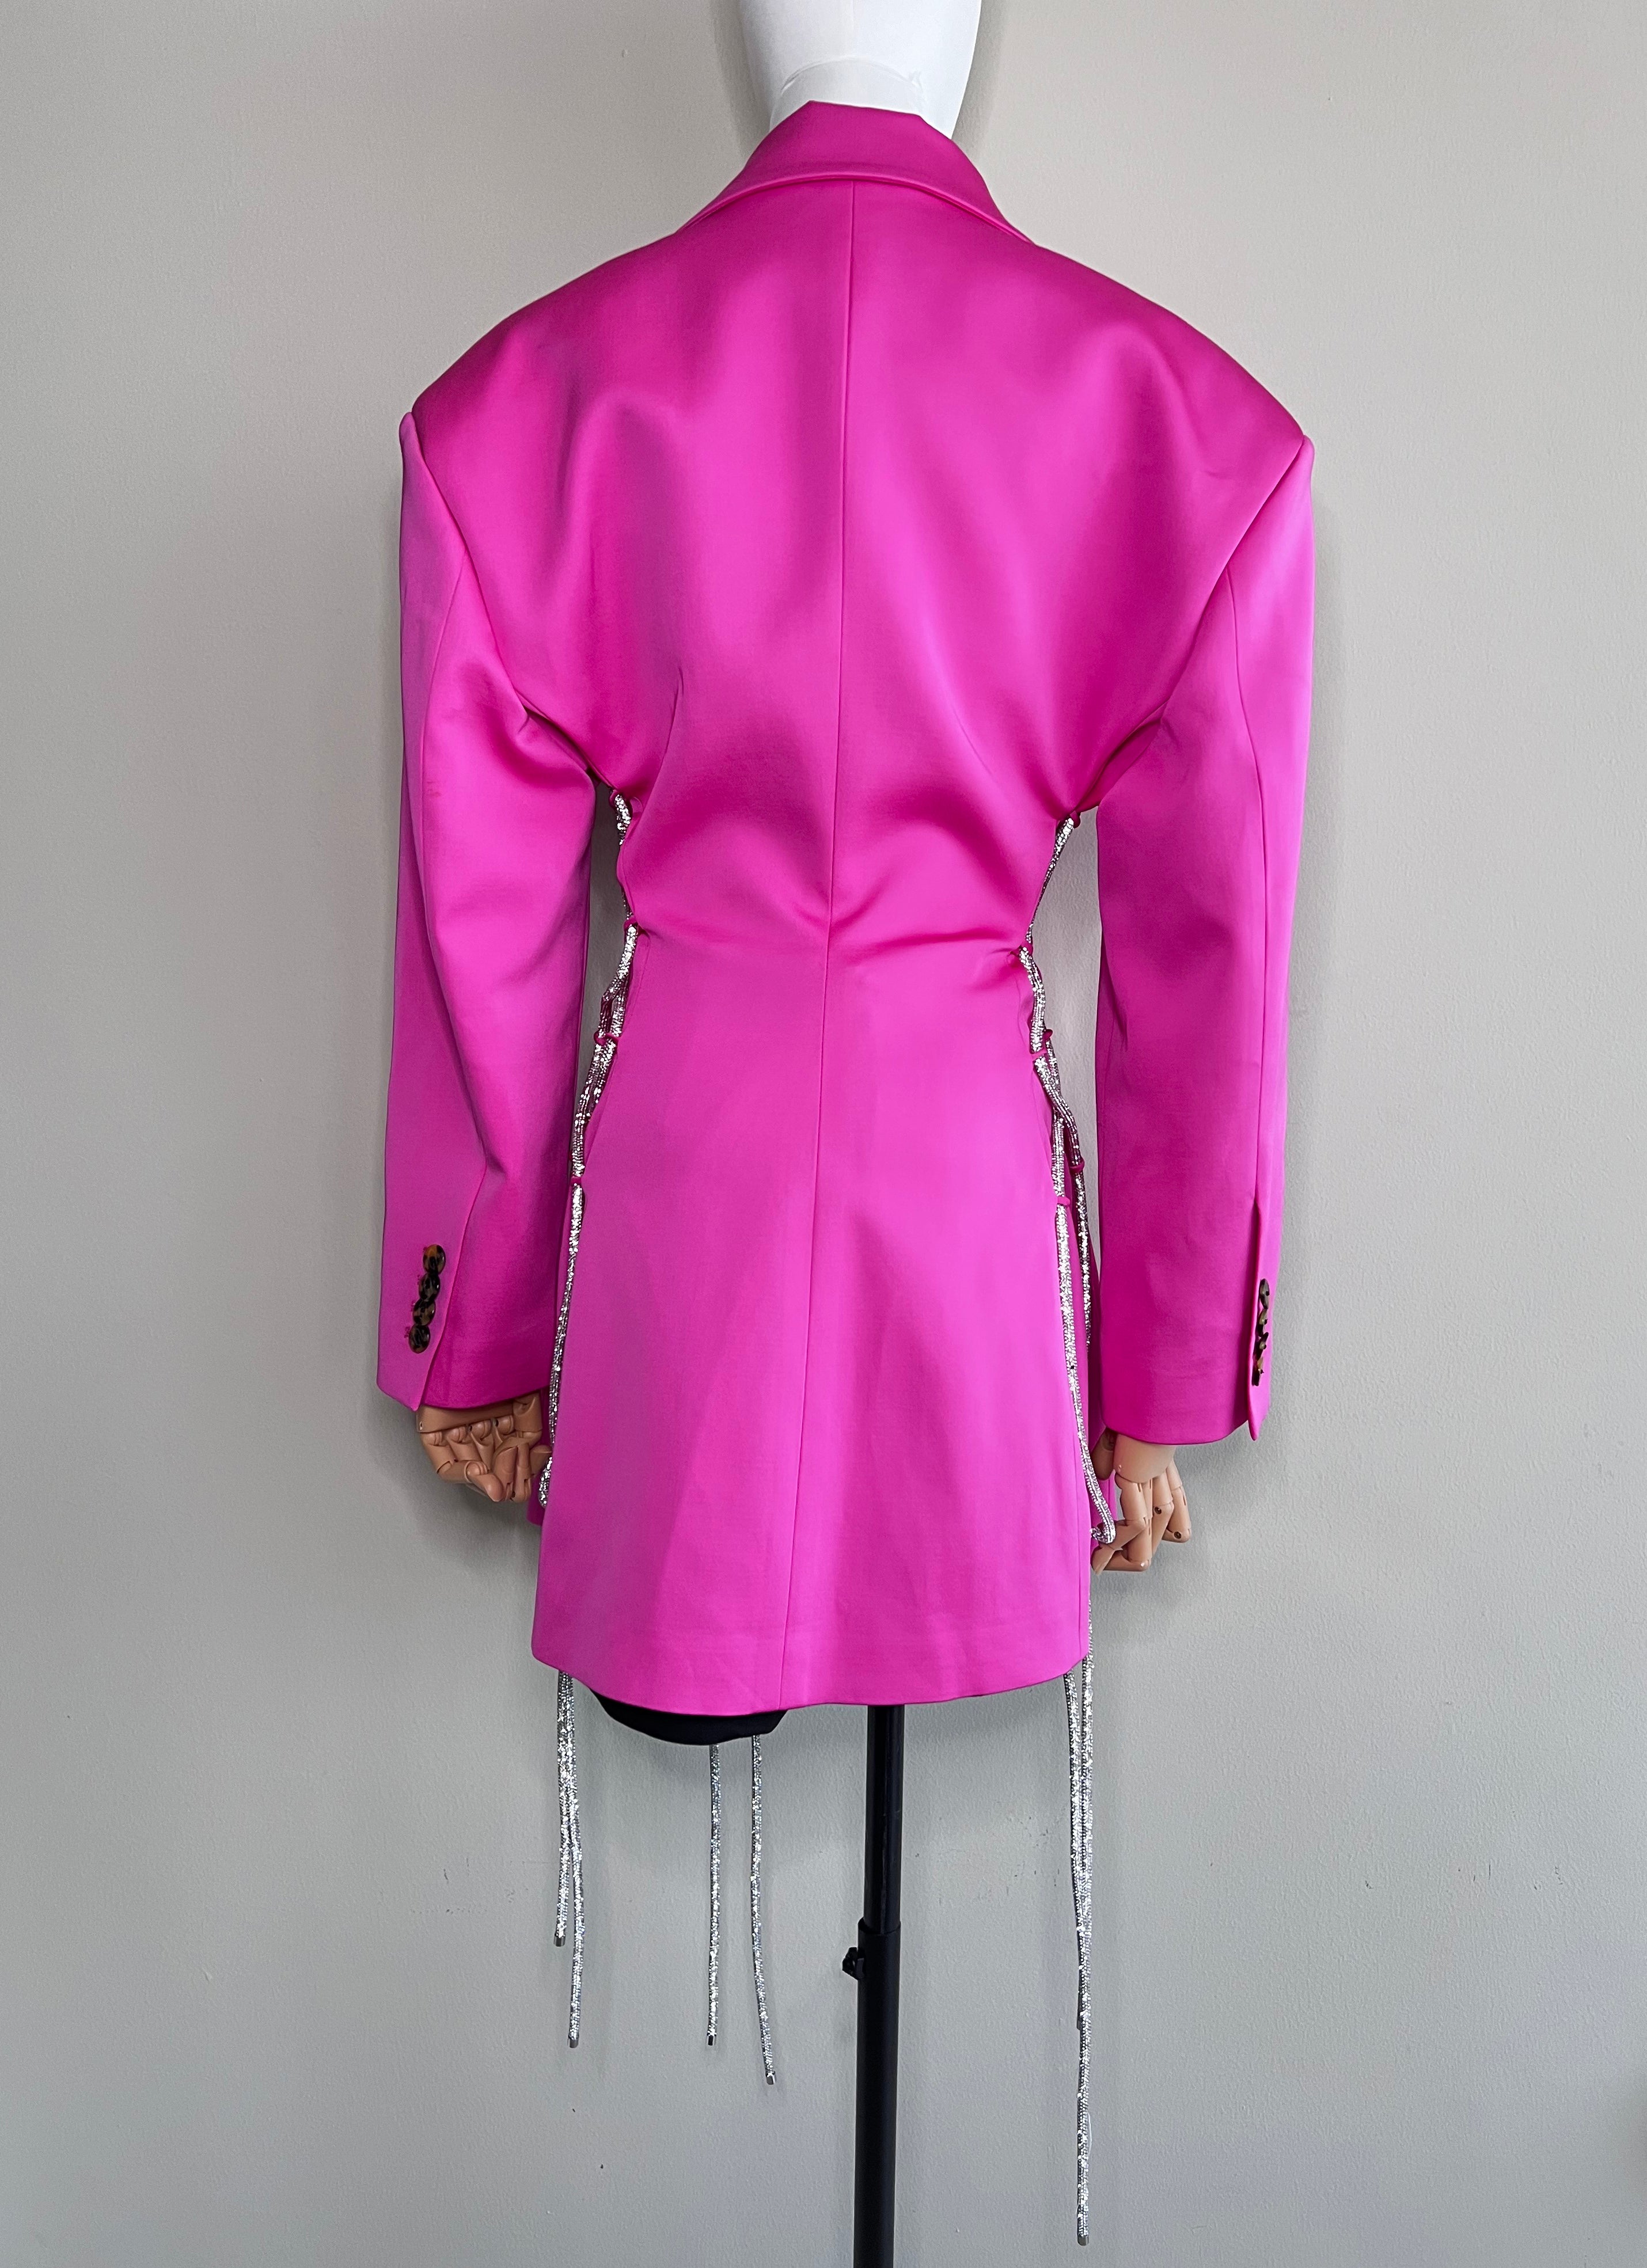 A set of Pink Blazer with Crystal embellished tie ups and Black skirt - Giuseppe Di Morabito